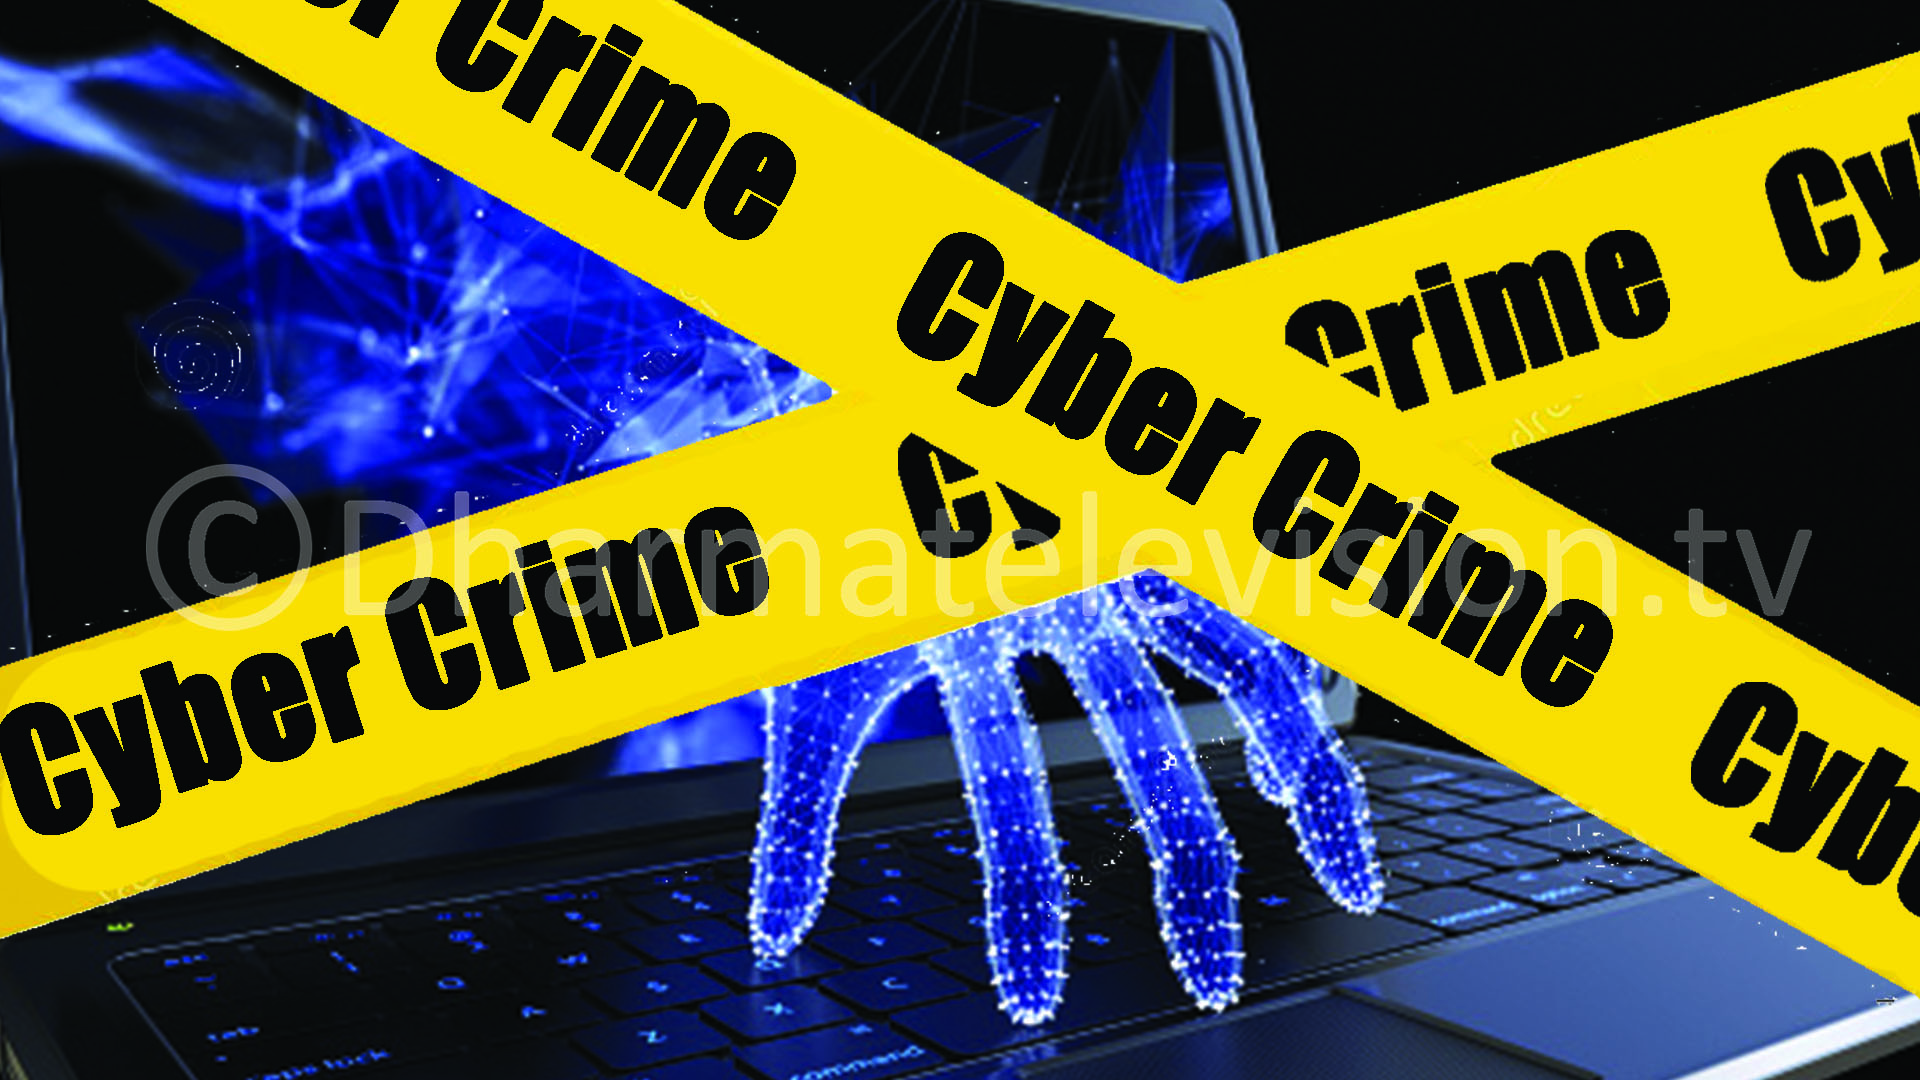 Cyber-attackers to be paid ransom